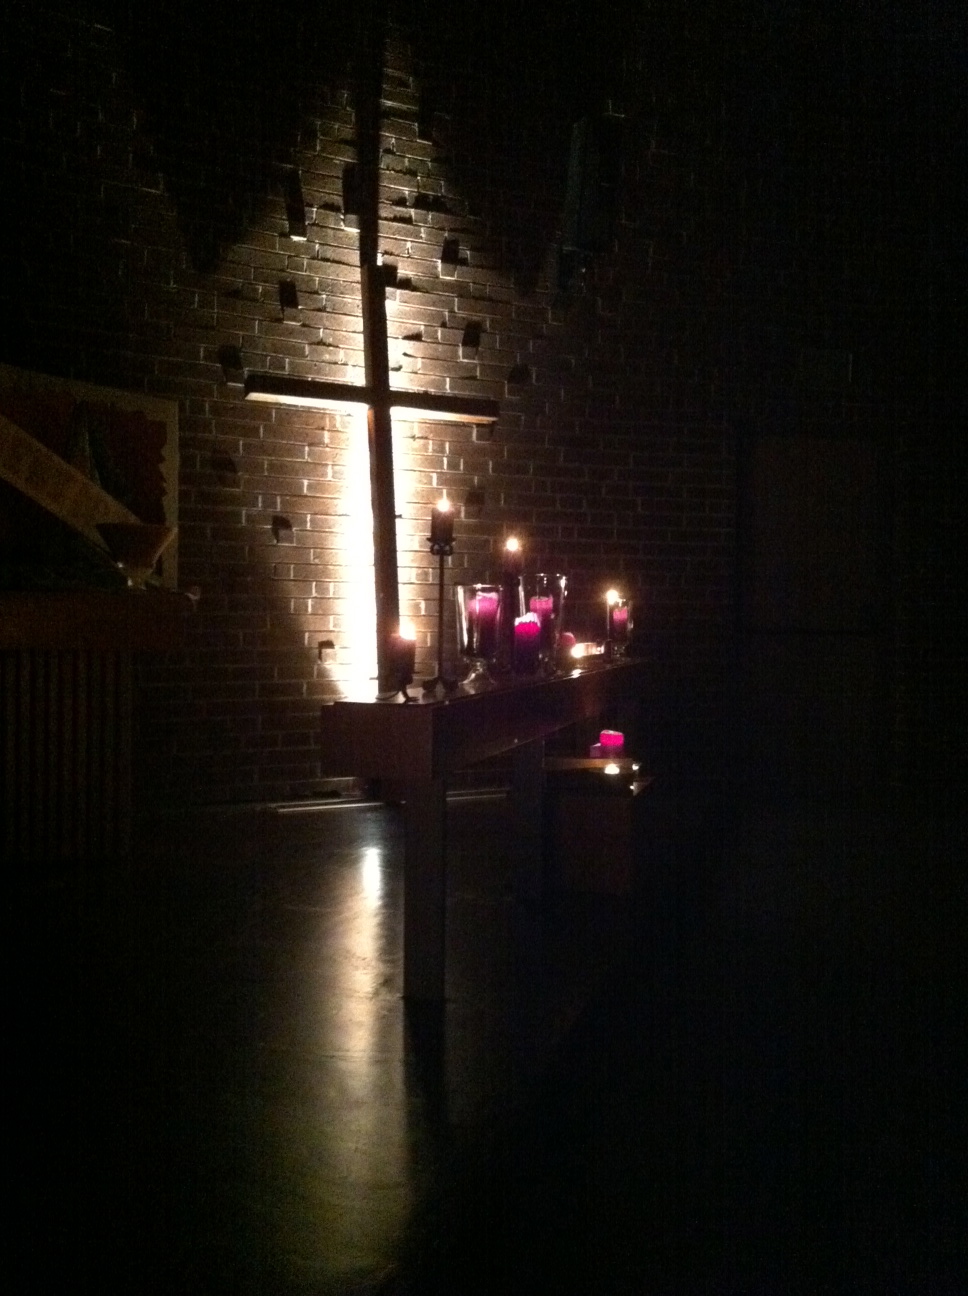 7:00 pm Good Friday Worship The Table at Central UMC